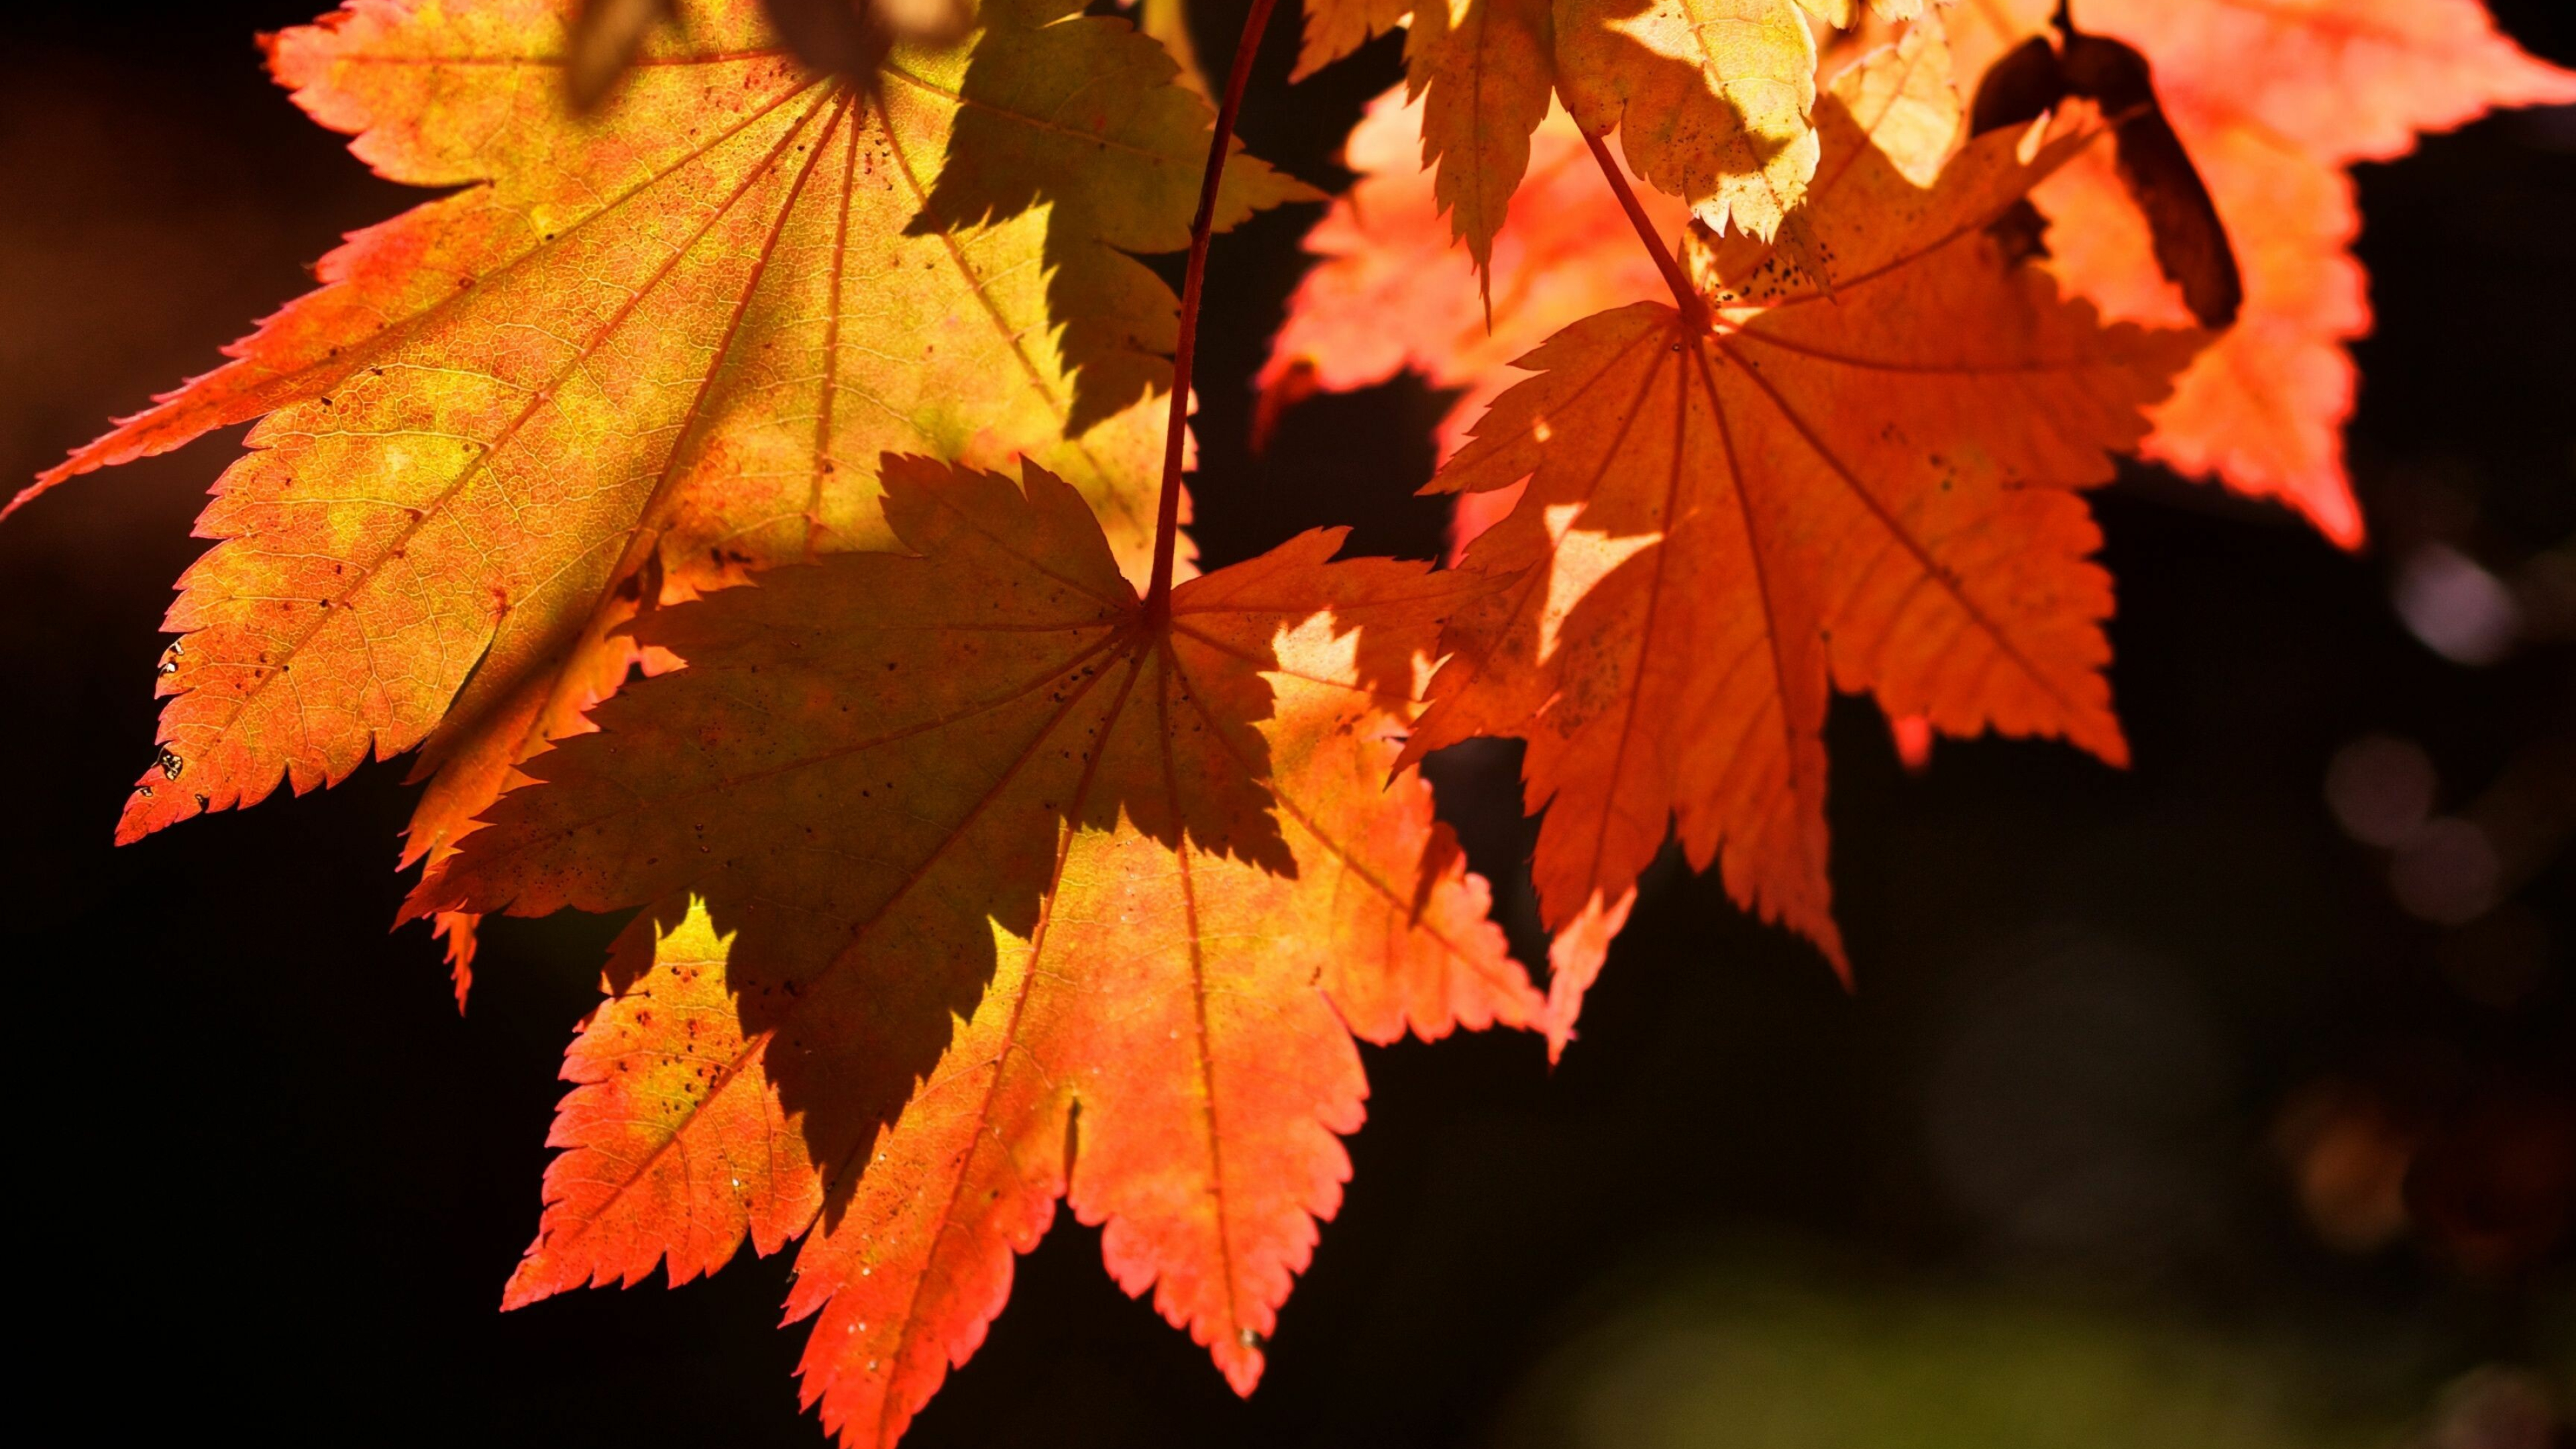 Leaf: Autumn, The fundamental structural units from which cones are constructed. 3840x2160 4K Wallpaper.